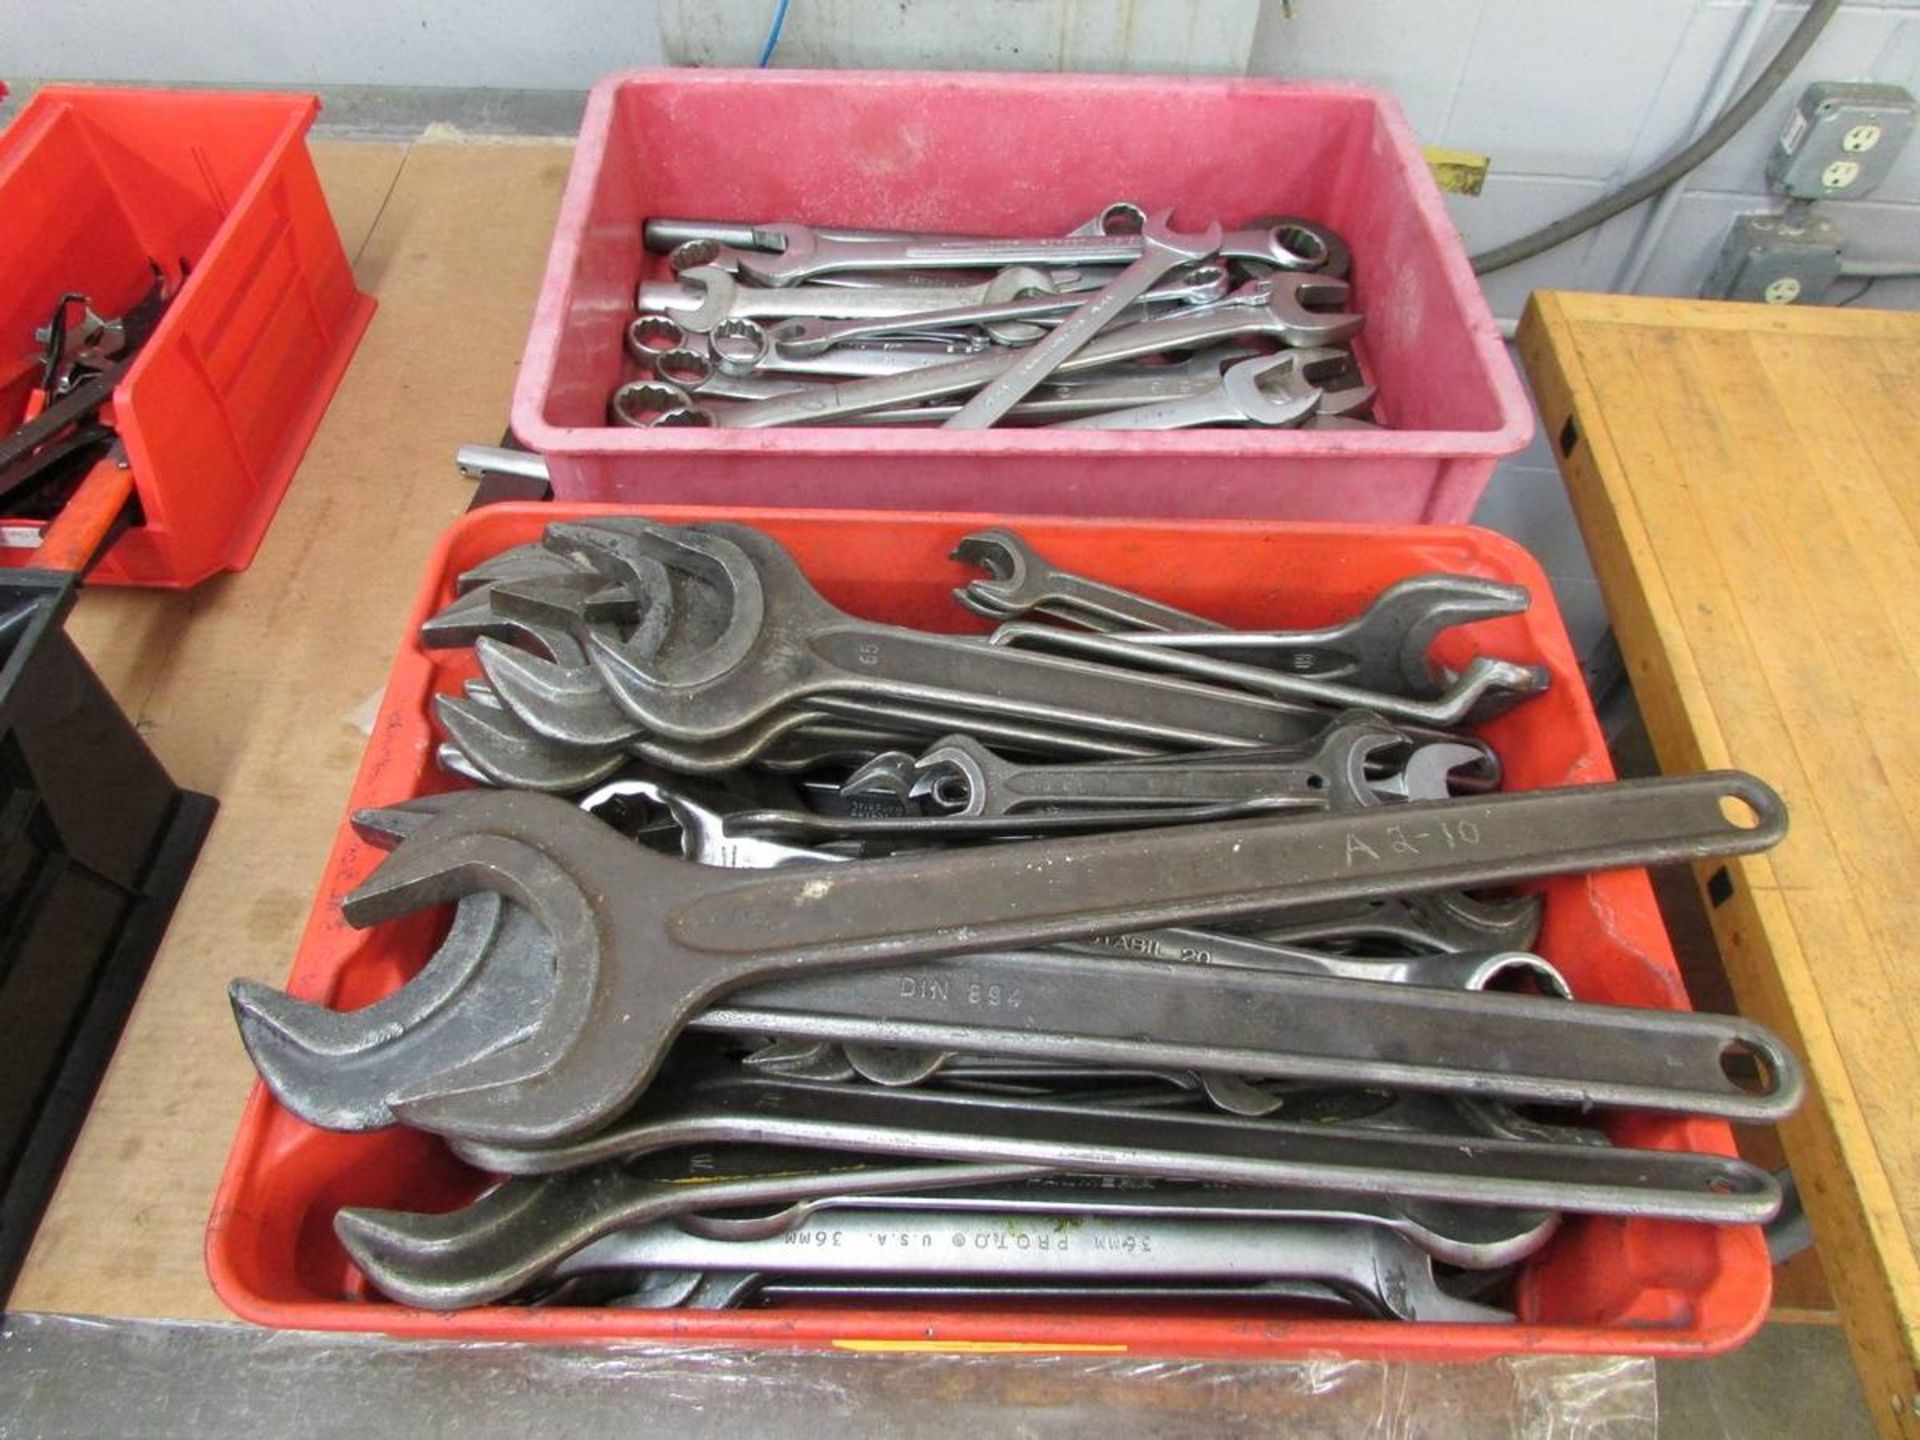 Bins of Assorted Metric and Standard Wrenches